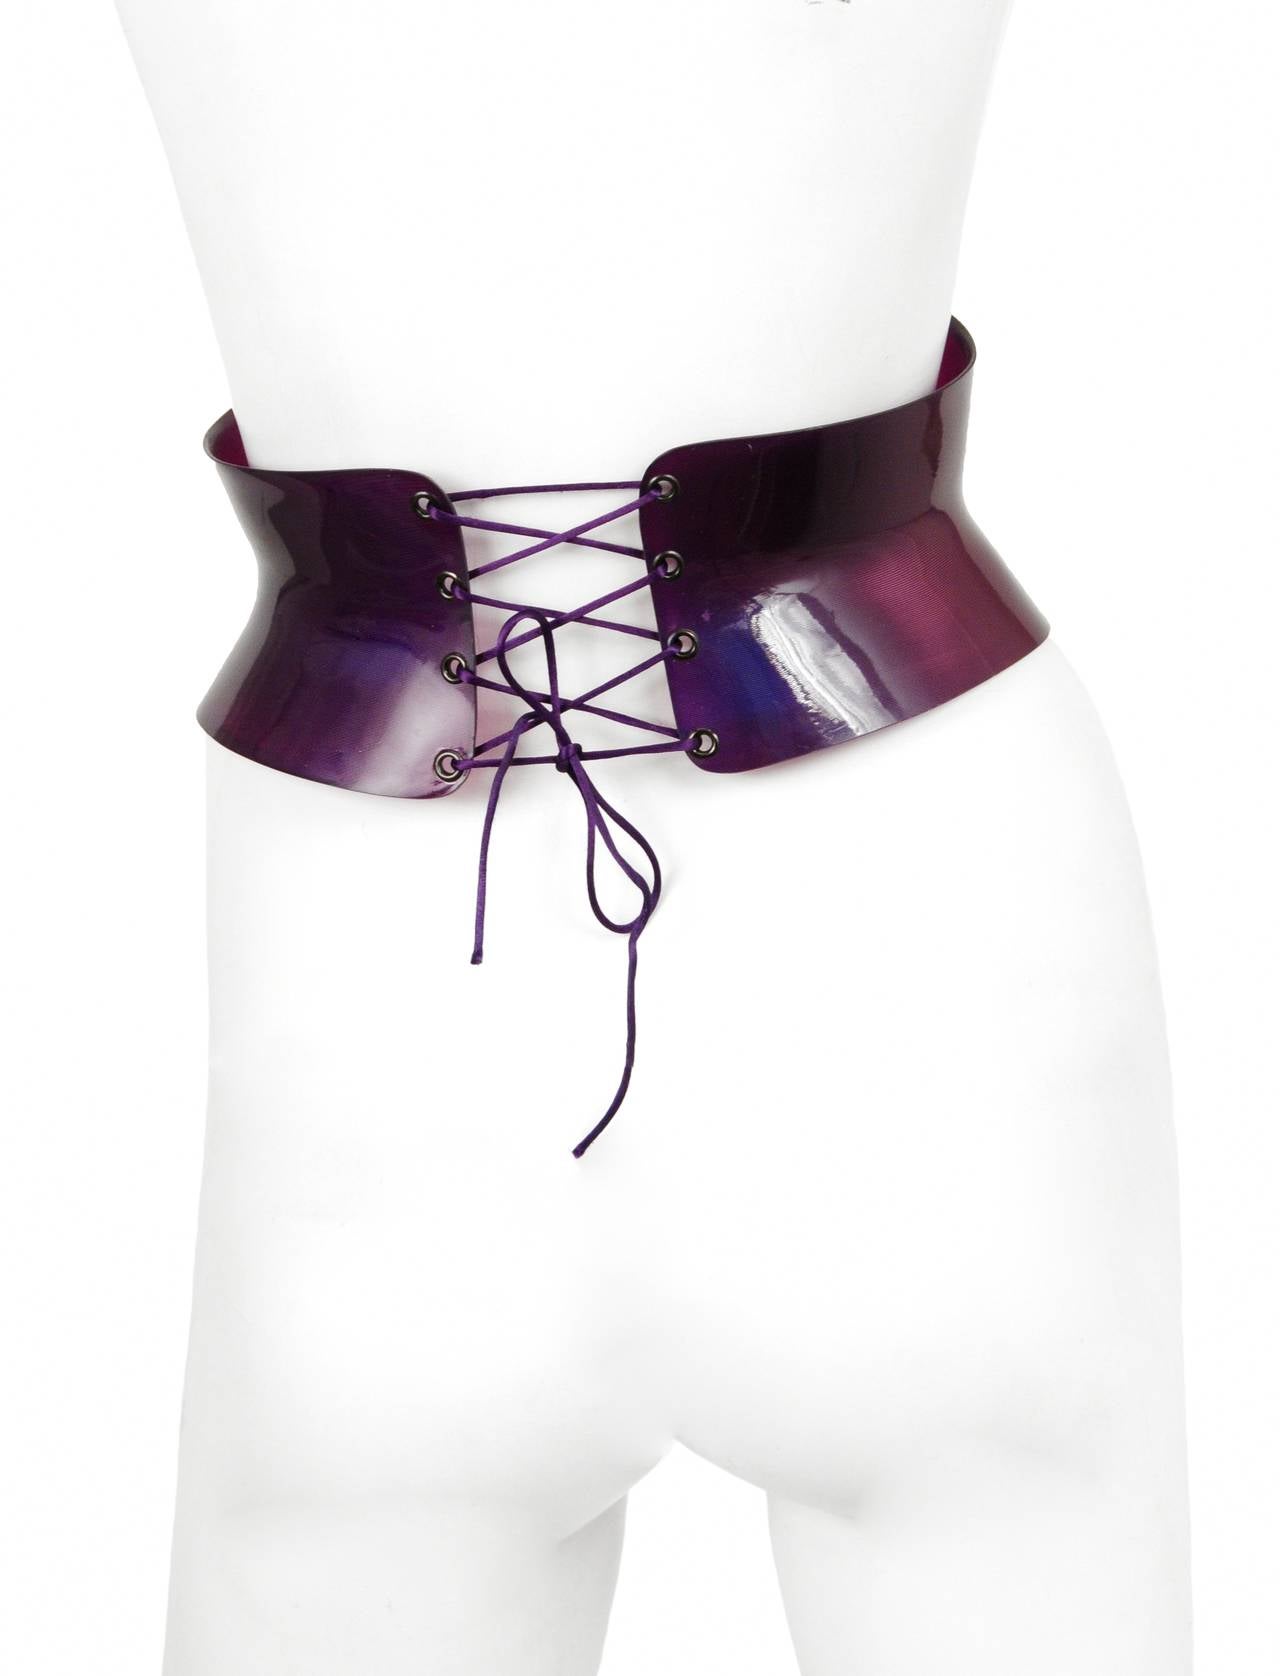 Vintage Thierry Mugler wide acrylic waist corset with iridescent sheen and lacing.